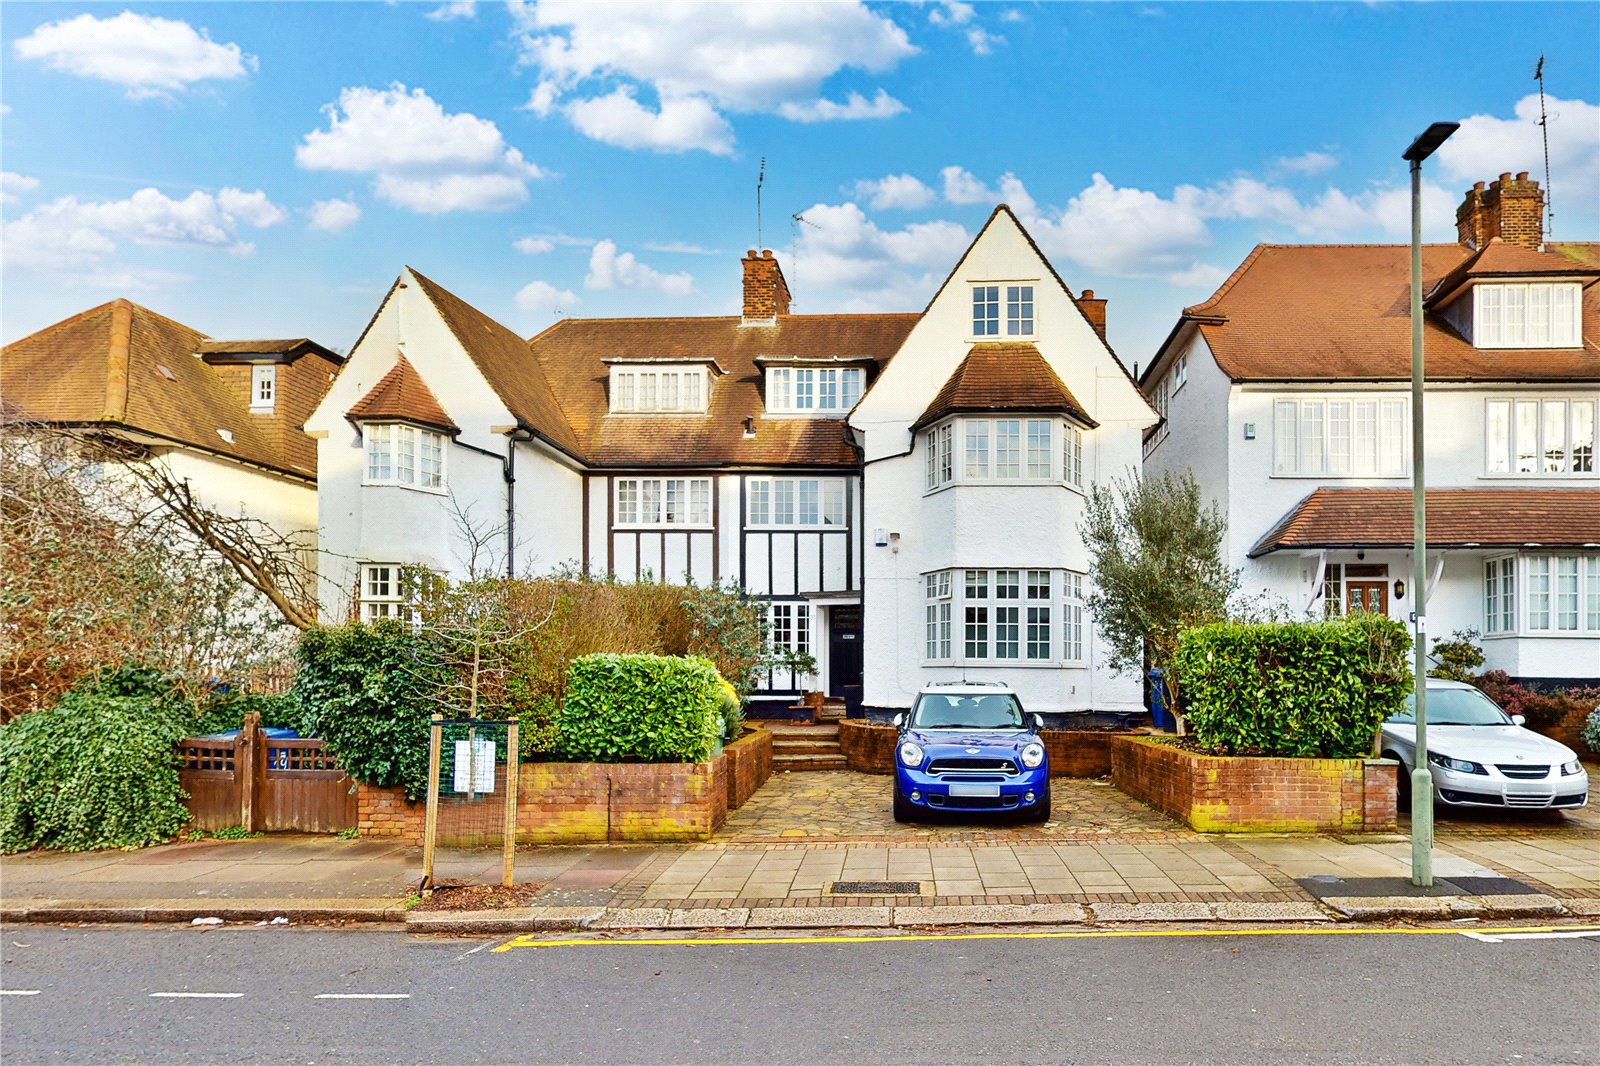 3 bedroom semi-detached house for sale in Rickmansworth